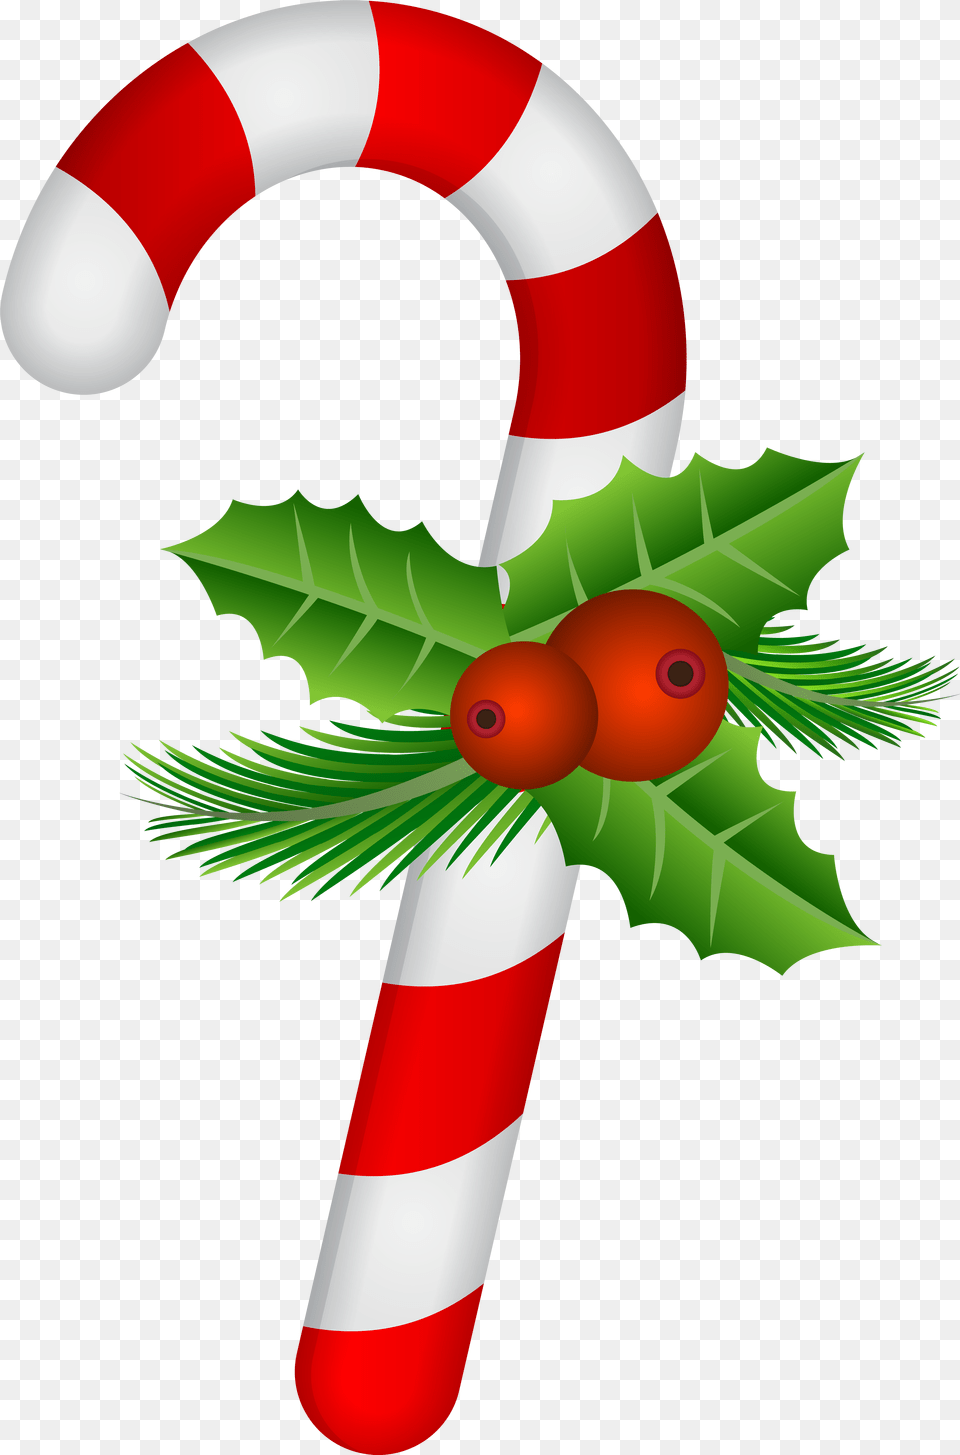 Holly File U0026 Clipart Clip Art Christmas Candy Cane, Food, Sweets, Stick, Rocket Png Image